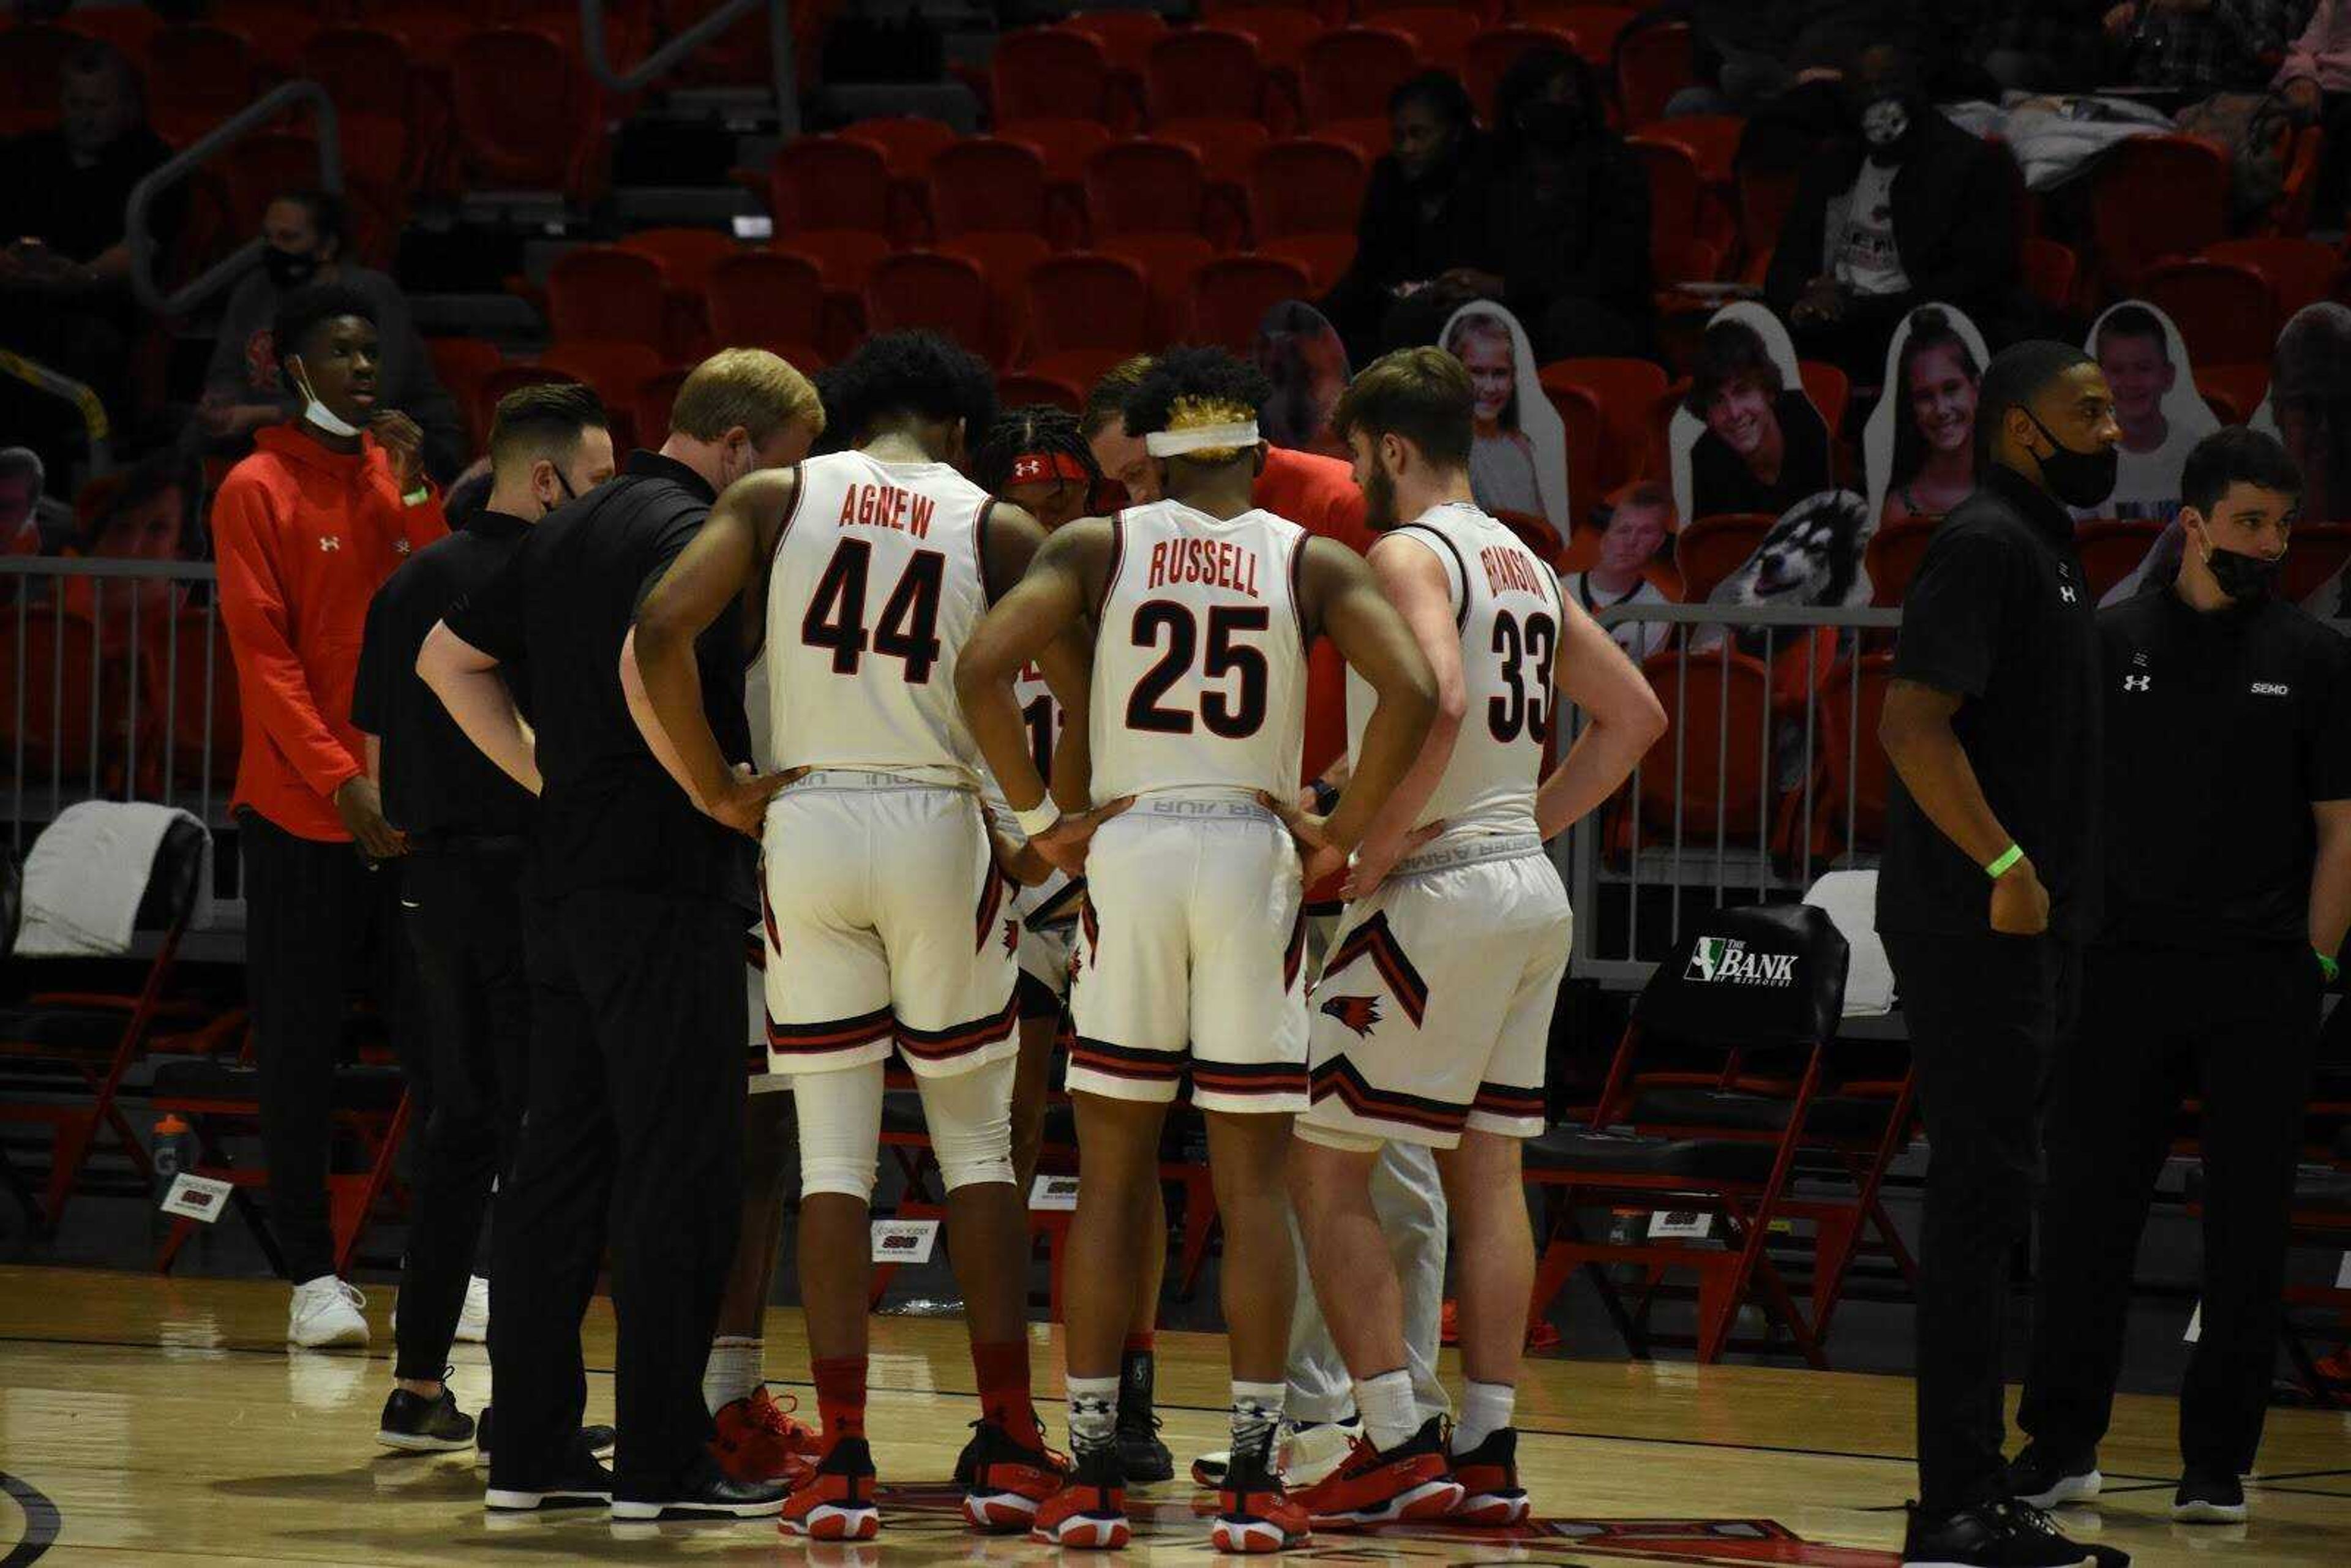 The Redhawks get instruction from Head Coach Brad Korn during Southeast's 94-72 win over Eastern Kentucky on Feb. 20 at the Show Me Center in Cape Girardeau.